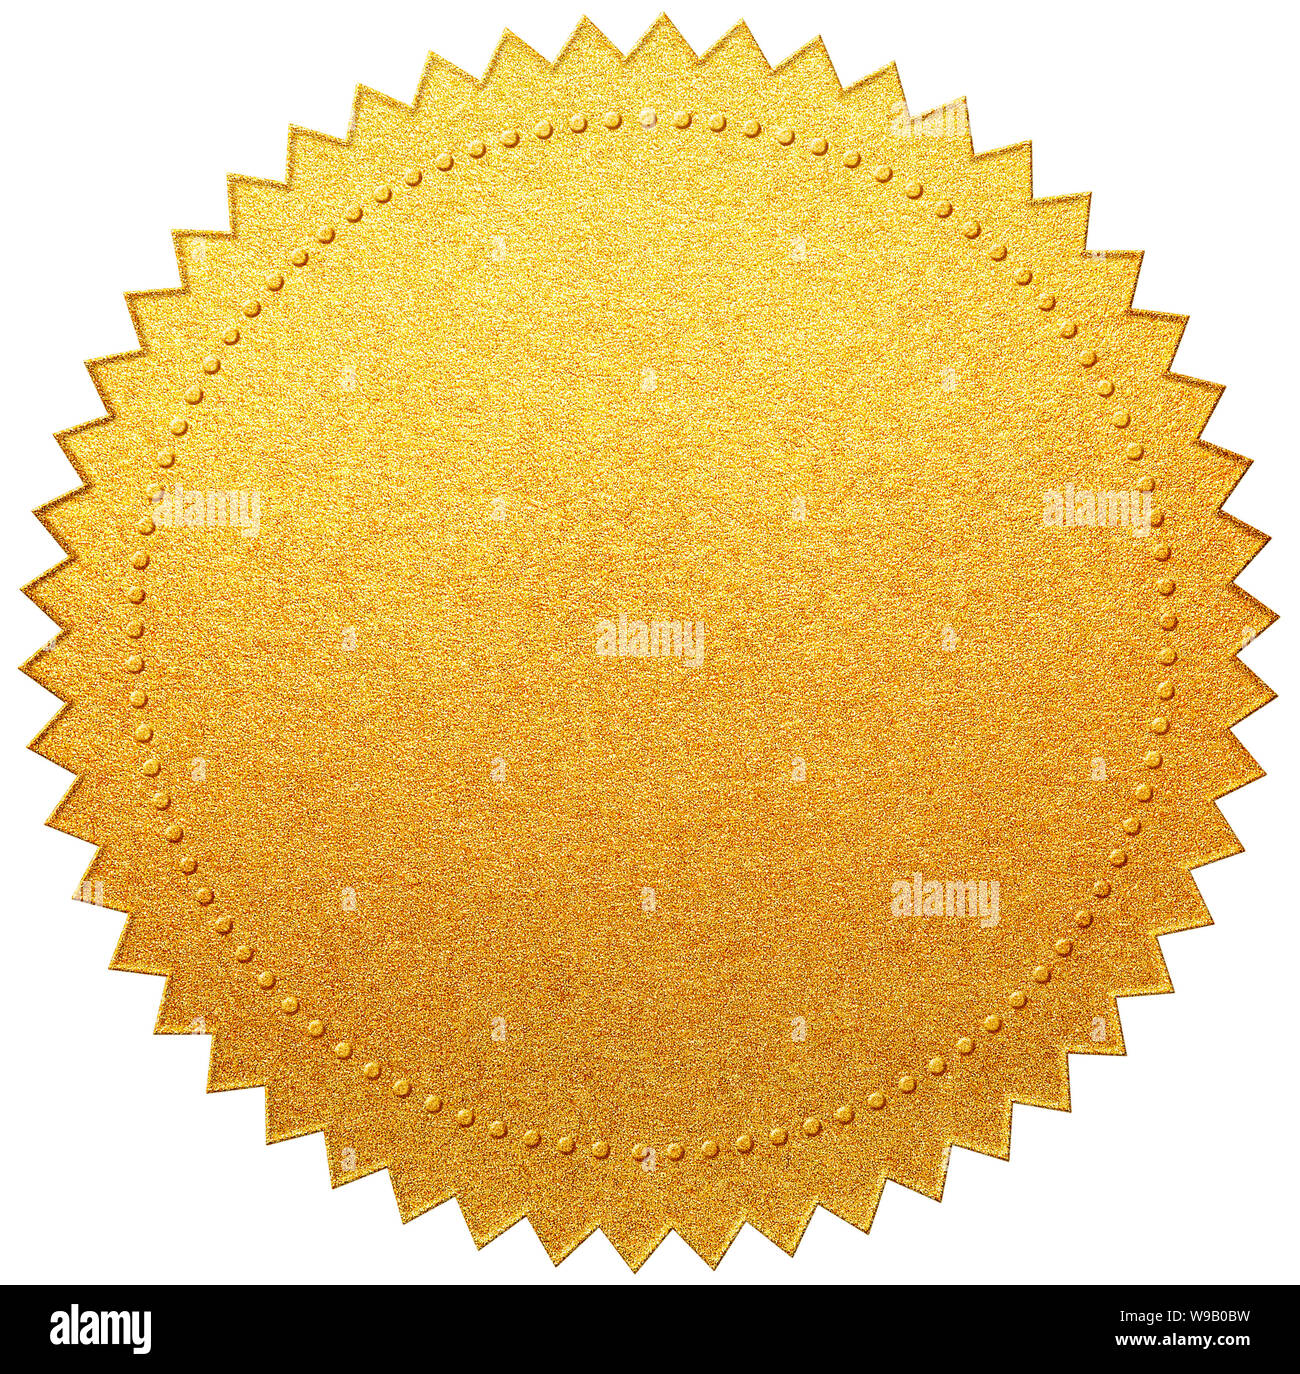 Gold paper diploma or certificate seal isolated Stock Photo